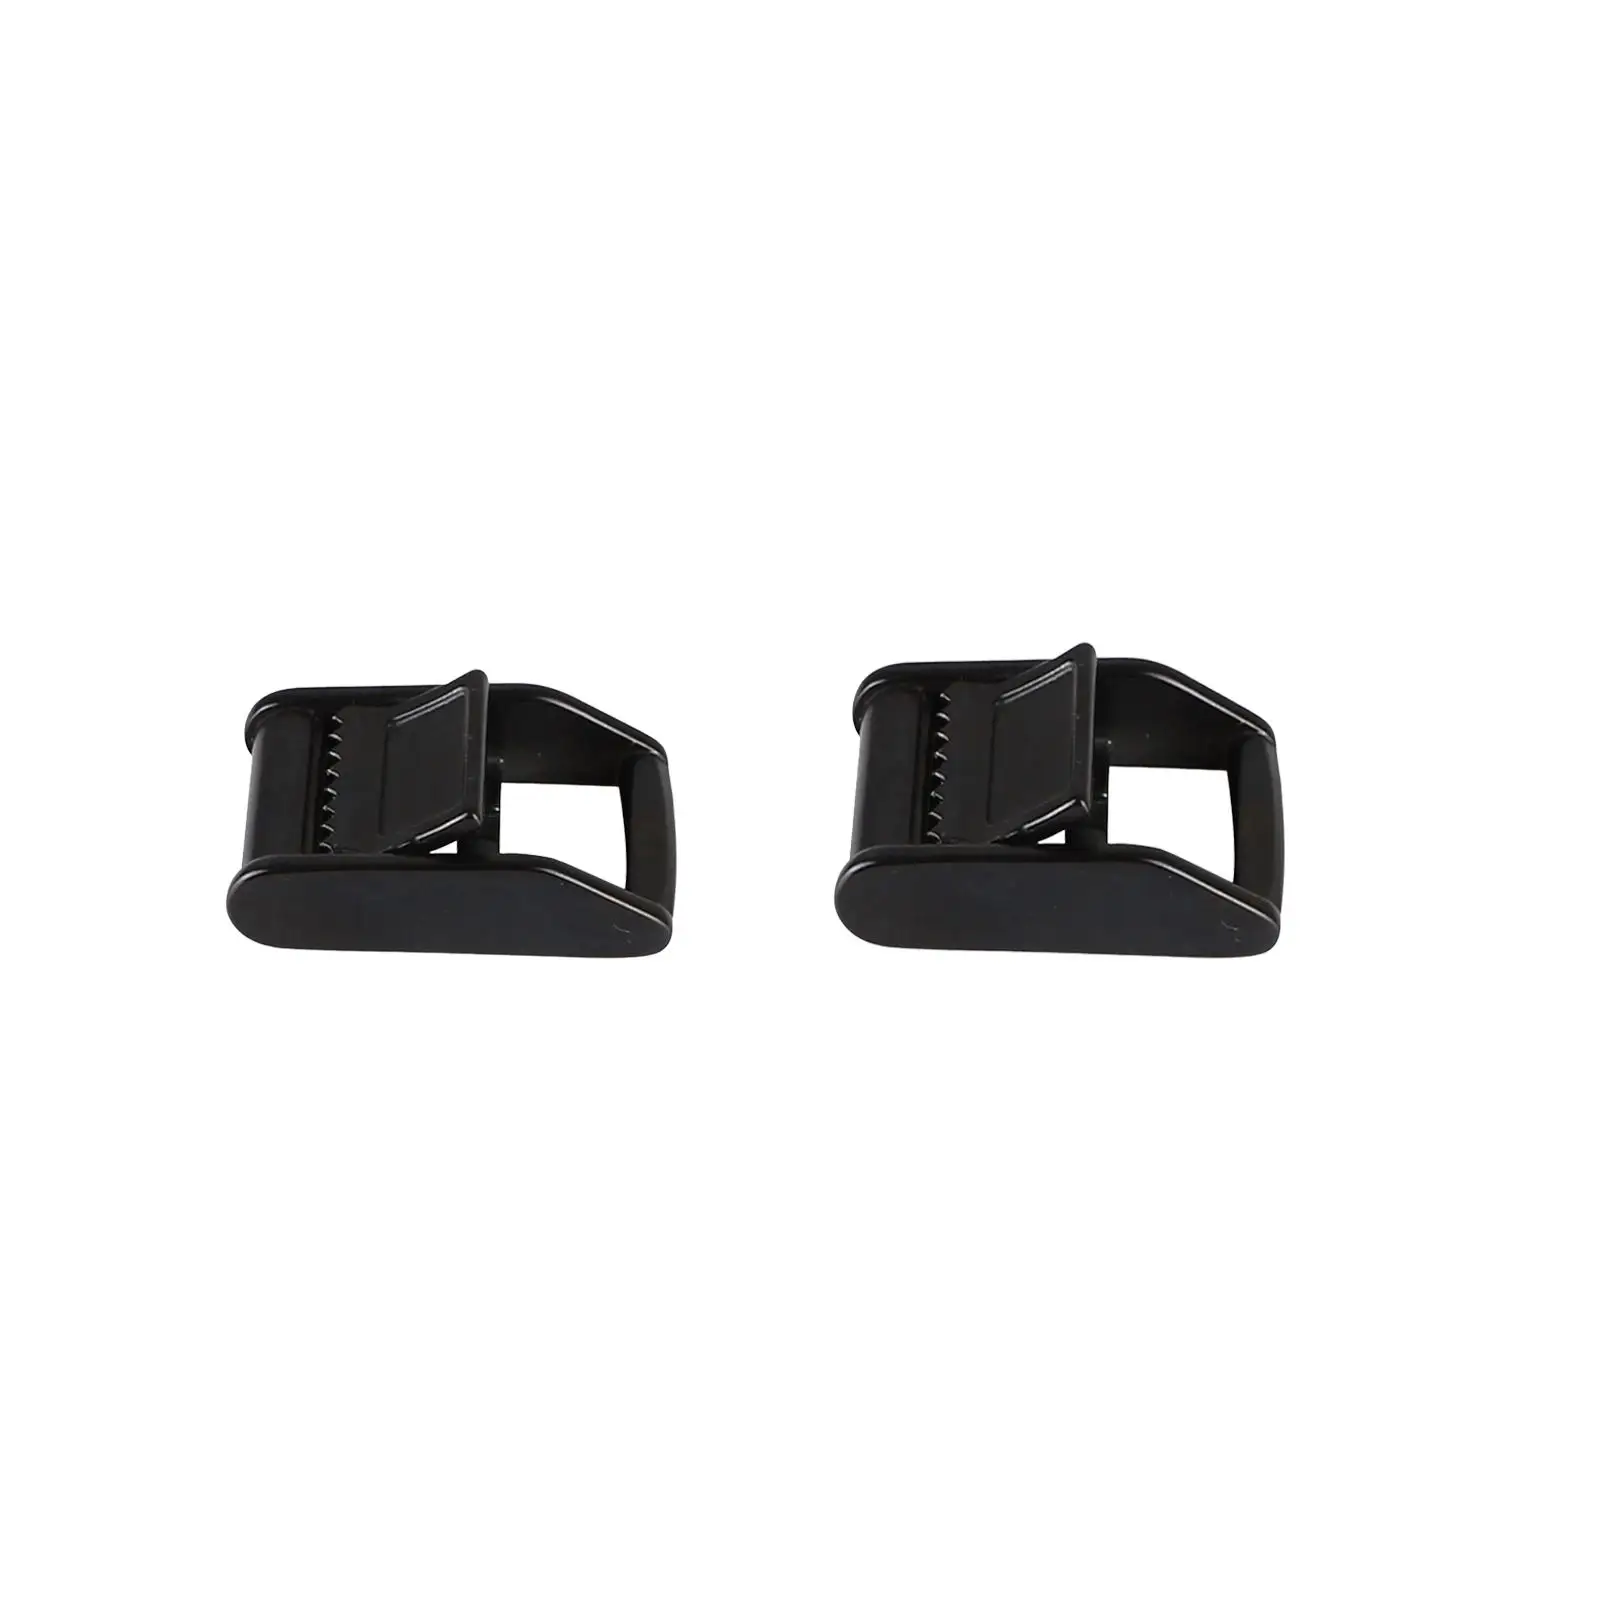 Webbing Buckle Tightening Buckle Straps for DIY Accessories Bags Boat Covers